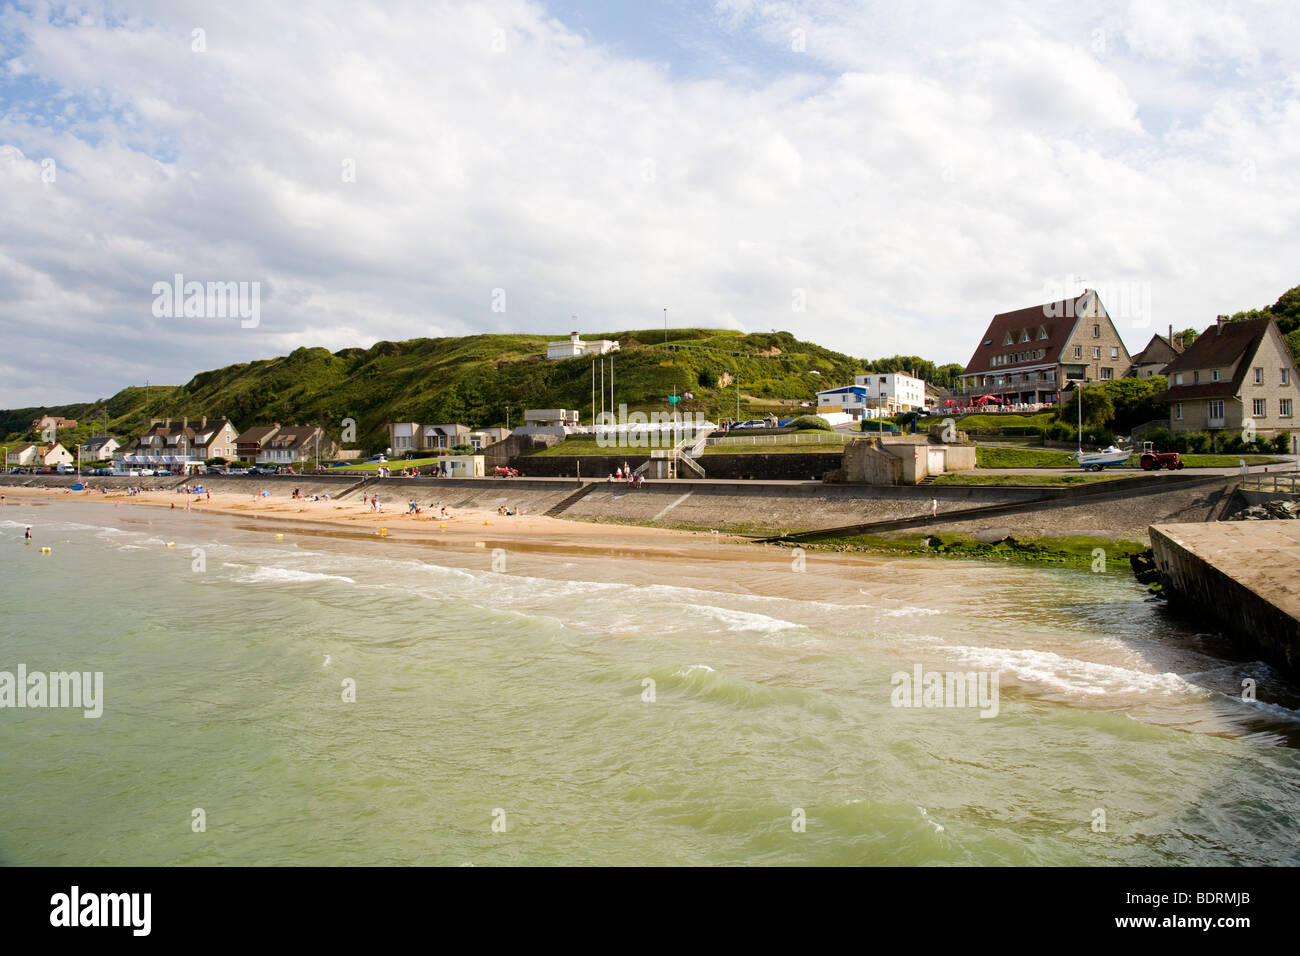 Coastal village of Verville Sur Mer in Basse-Normandie, France. Also known as Omaha Beach, the site of the D-Day landings. Stock Photo